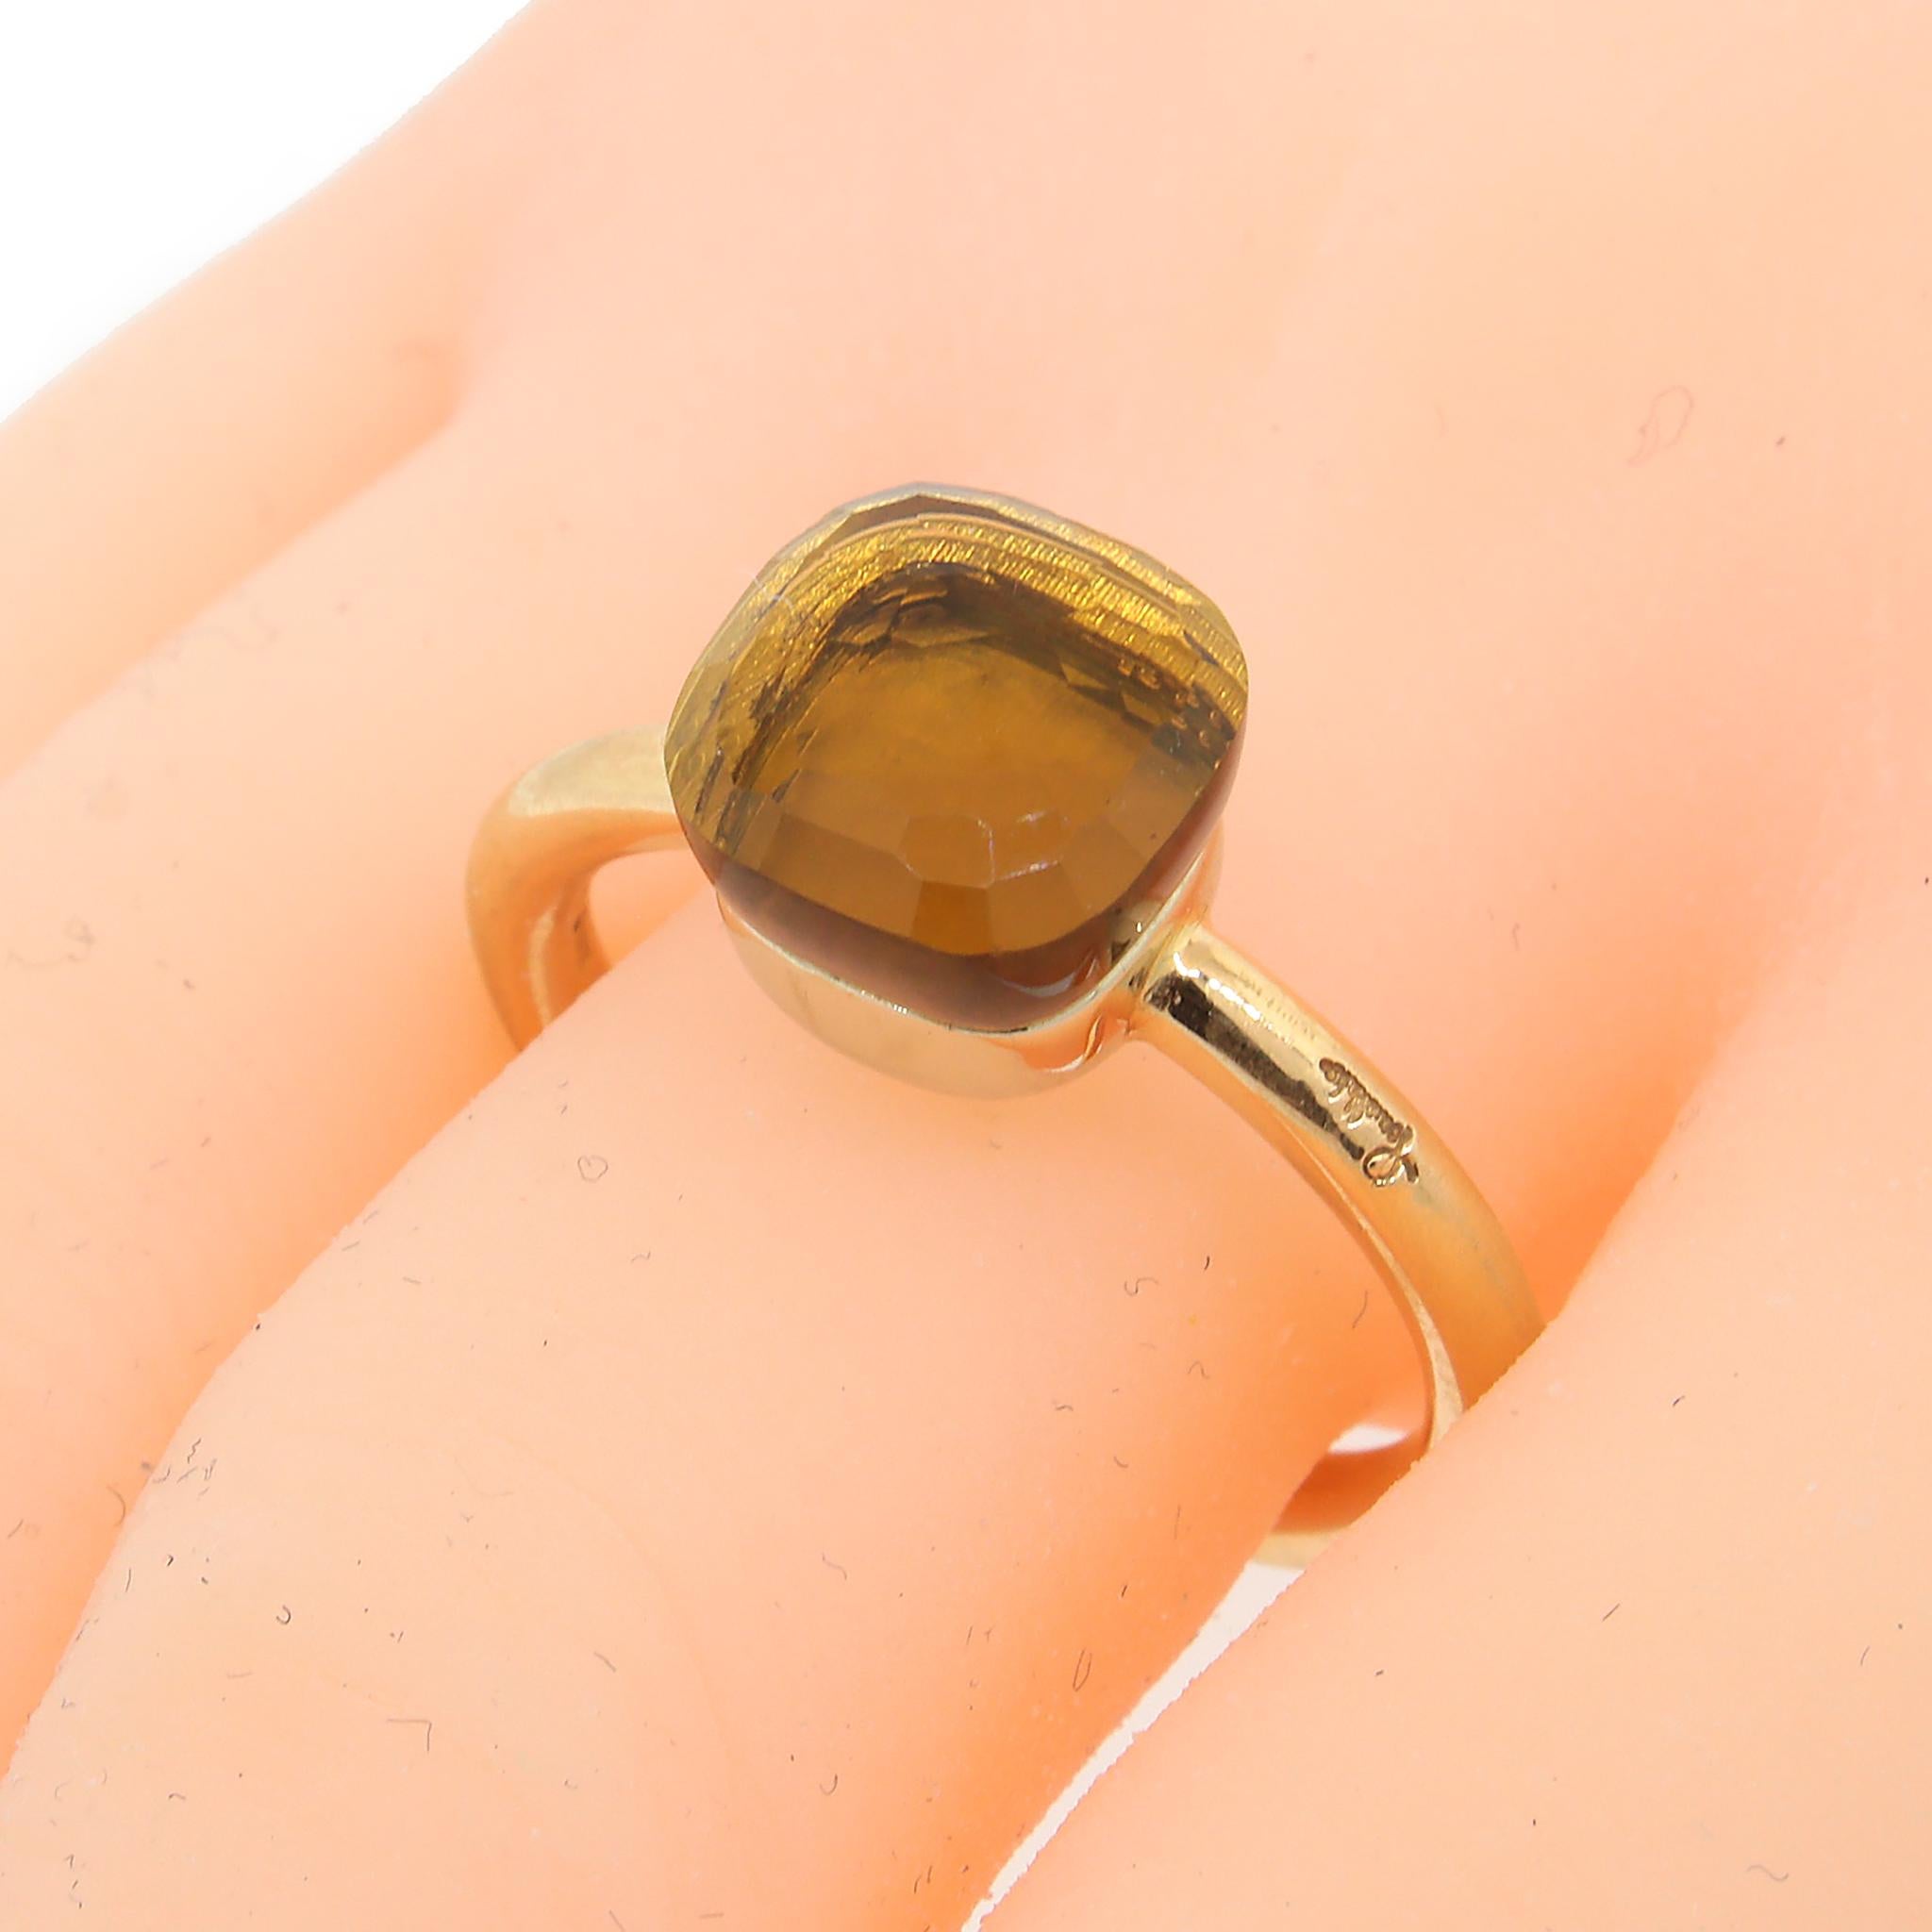 18 kt Rose Gold
Citrine - Faceted Cabochon
Ring Size: 8.25
Total Weight: 8.6 grams